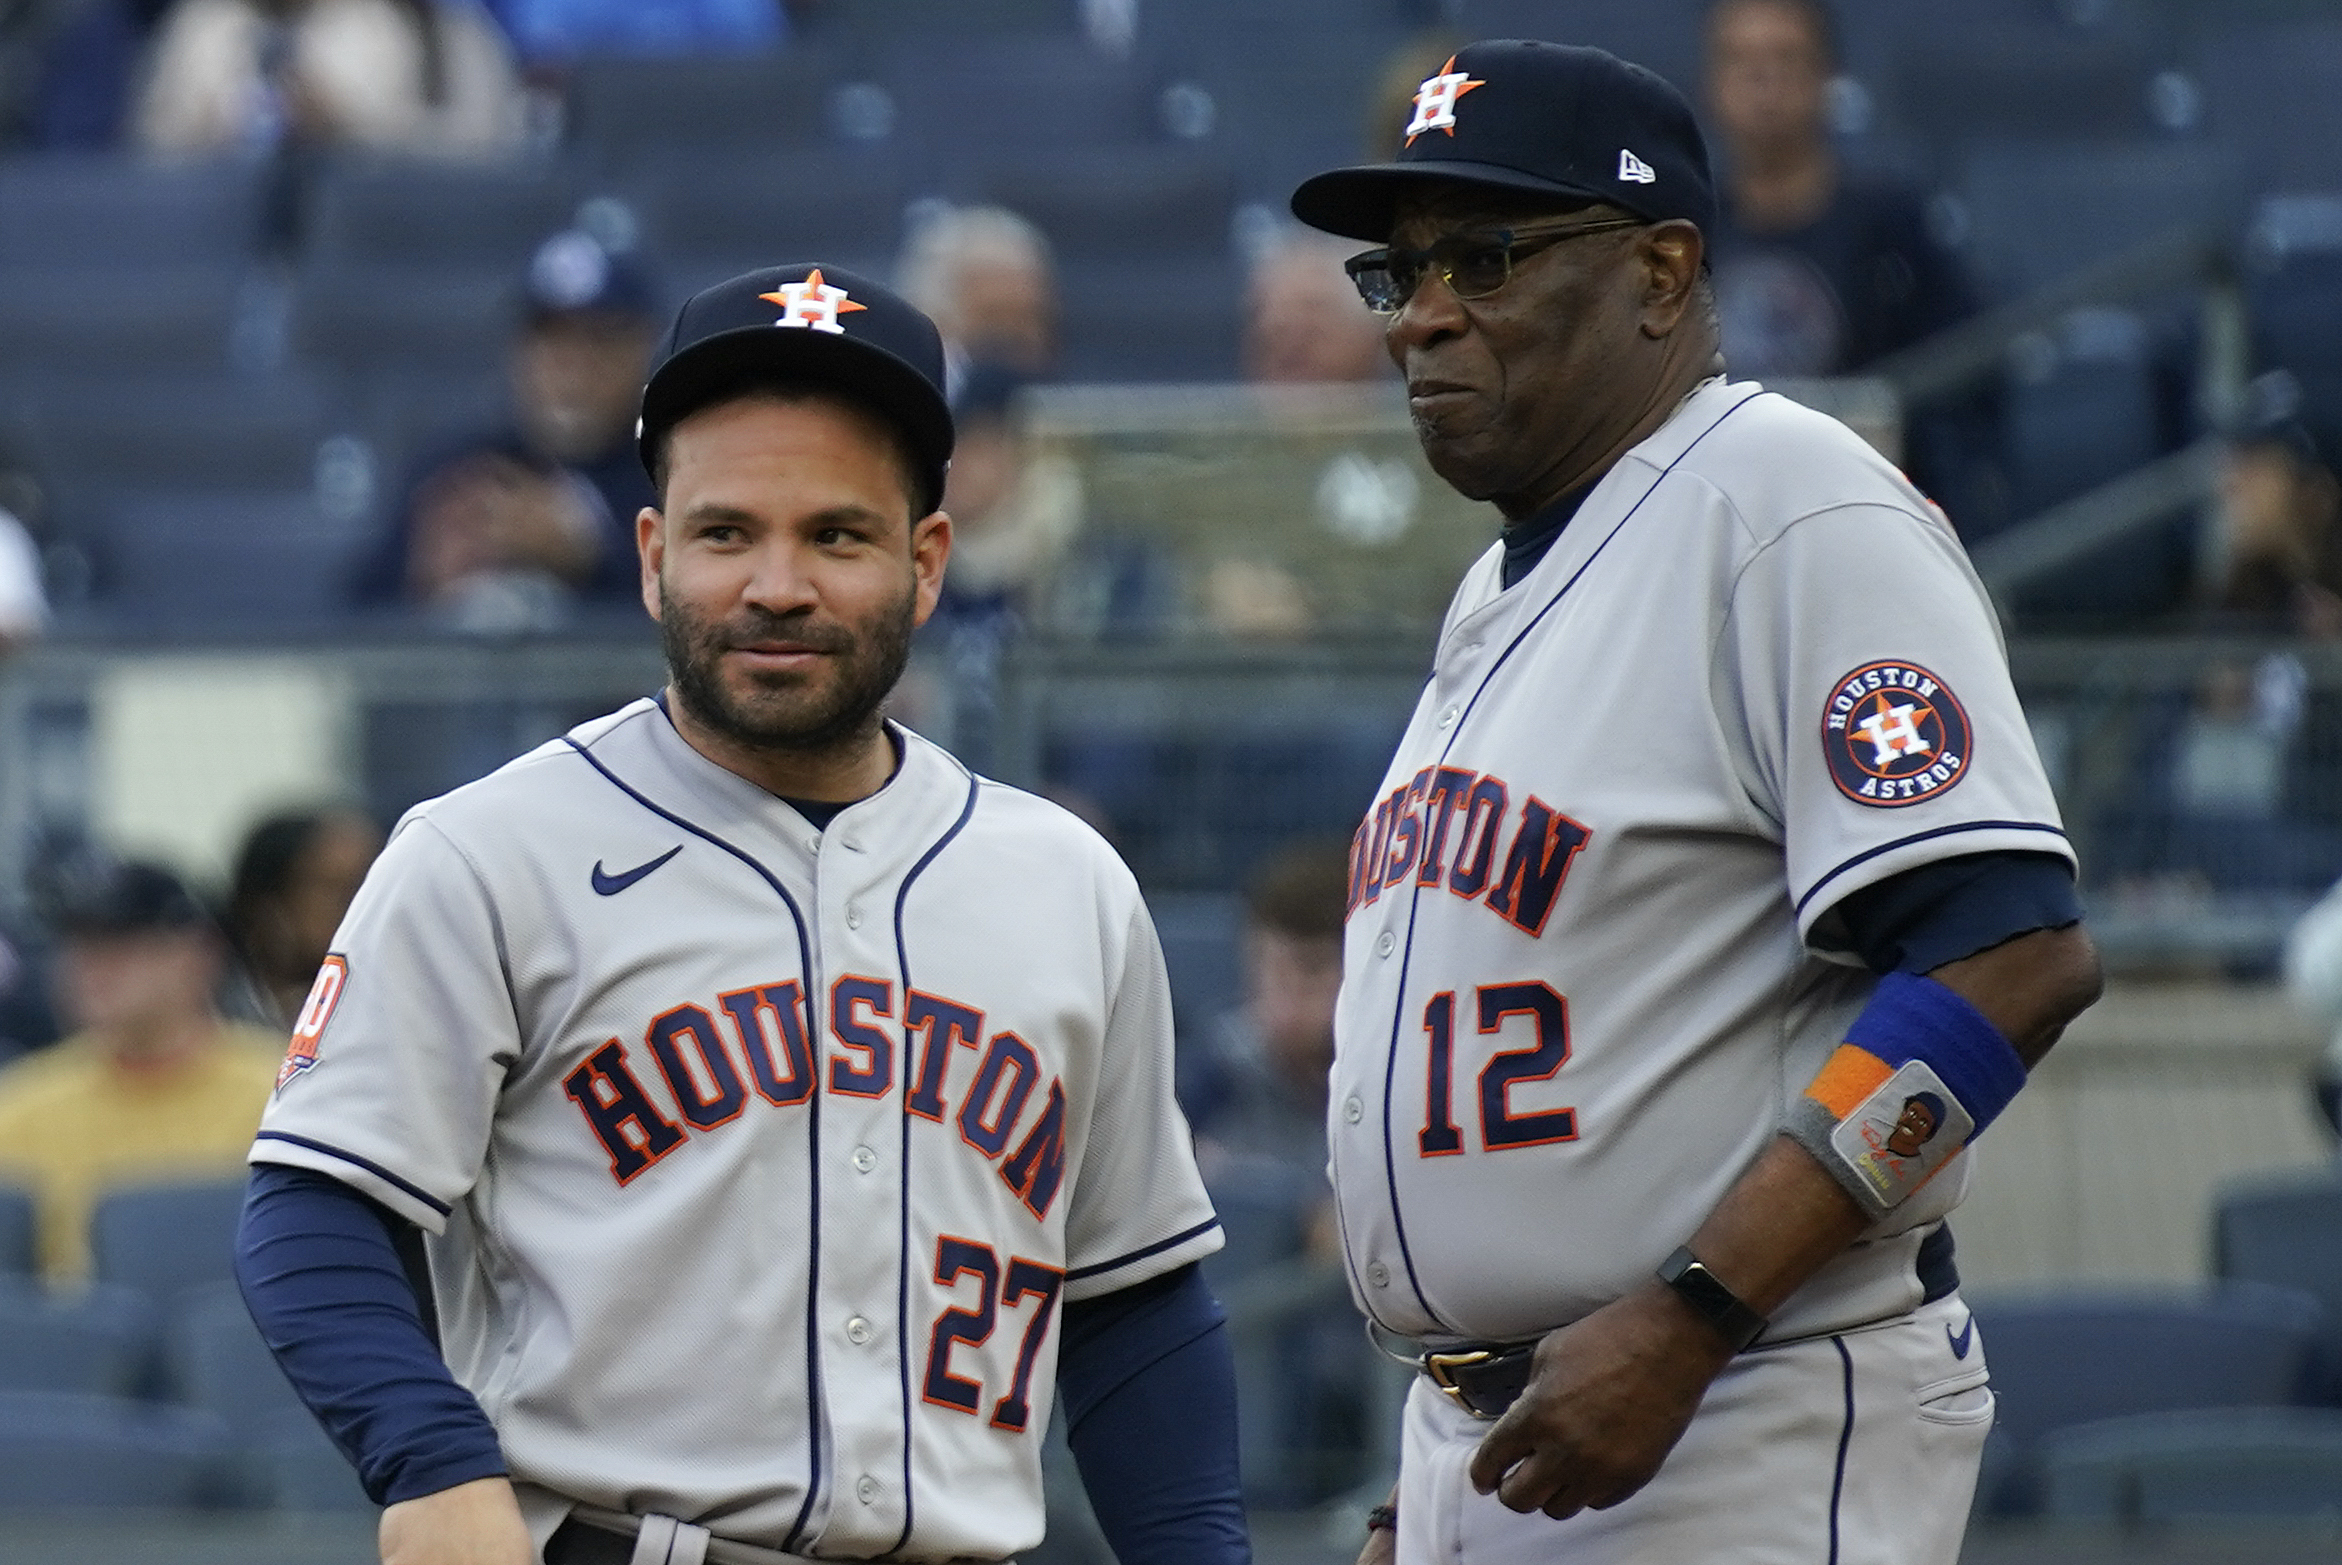 Everyone in the Astros' dugout has a Dusty Baker story and he has